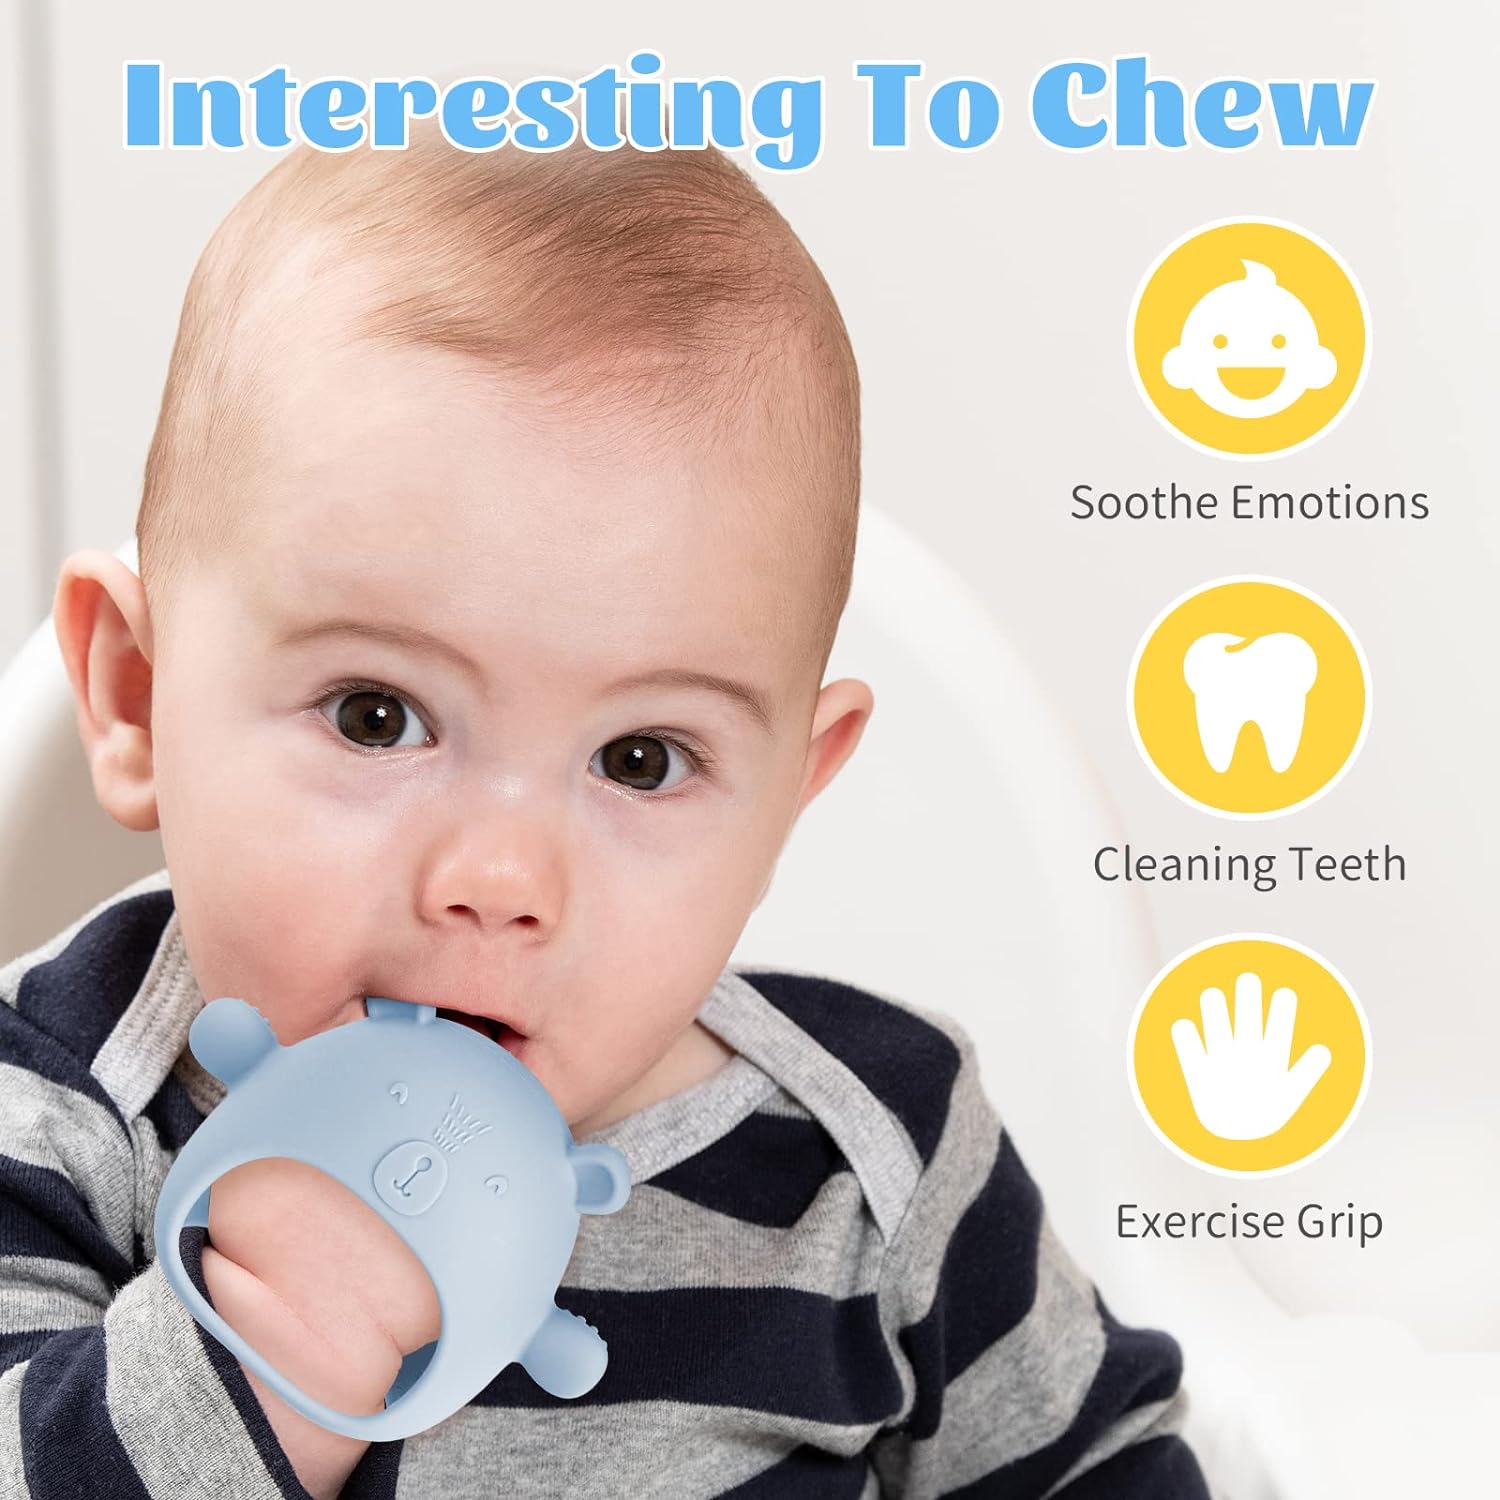 NiBaby Silicone Baby Mitten Teething Chew Toy for Babies 0-6 Months 6-12 Months, Anti-Drop Teether Glove BPA-Free for Girls and Boys Sucking Biting Needs Soothing Gums Pain Relief (Blue)